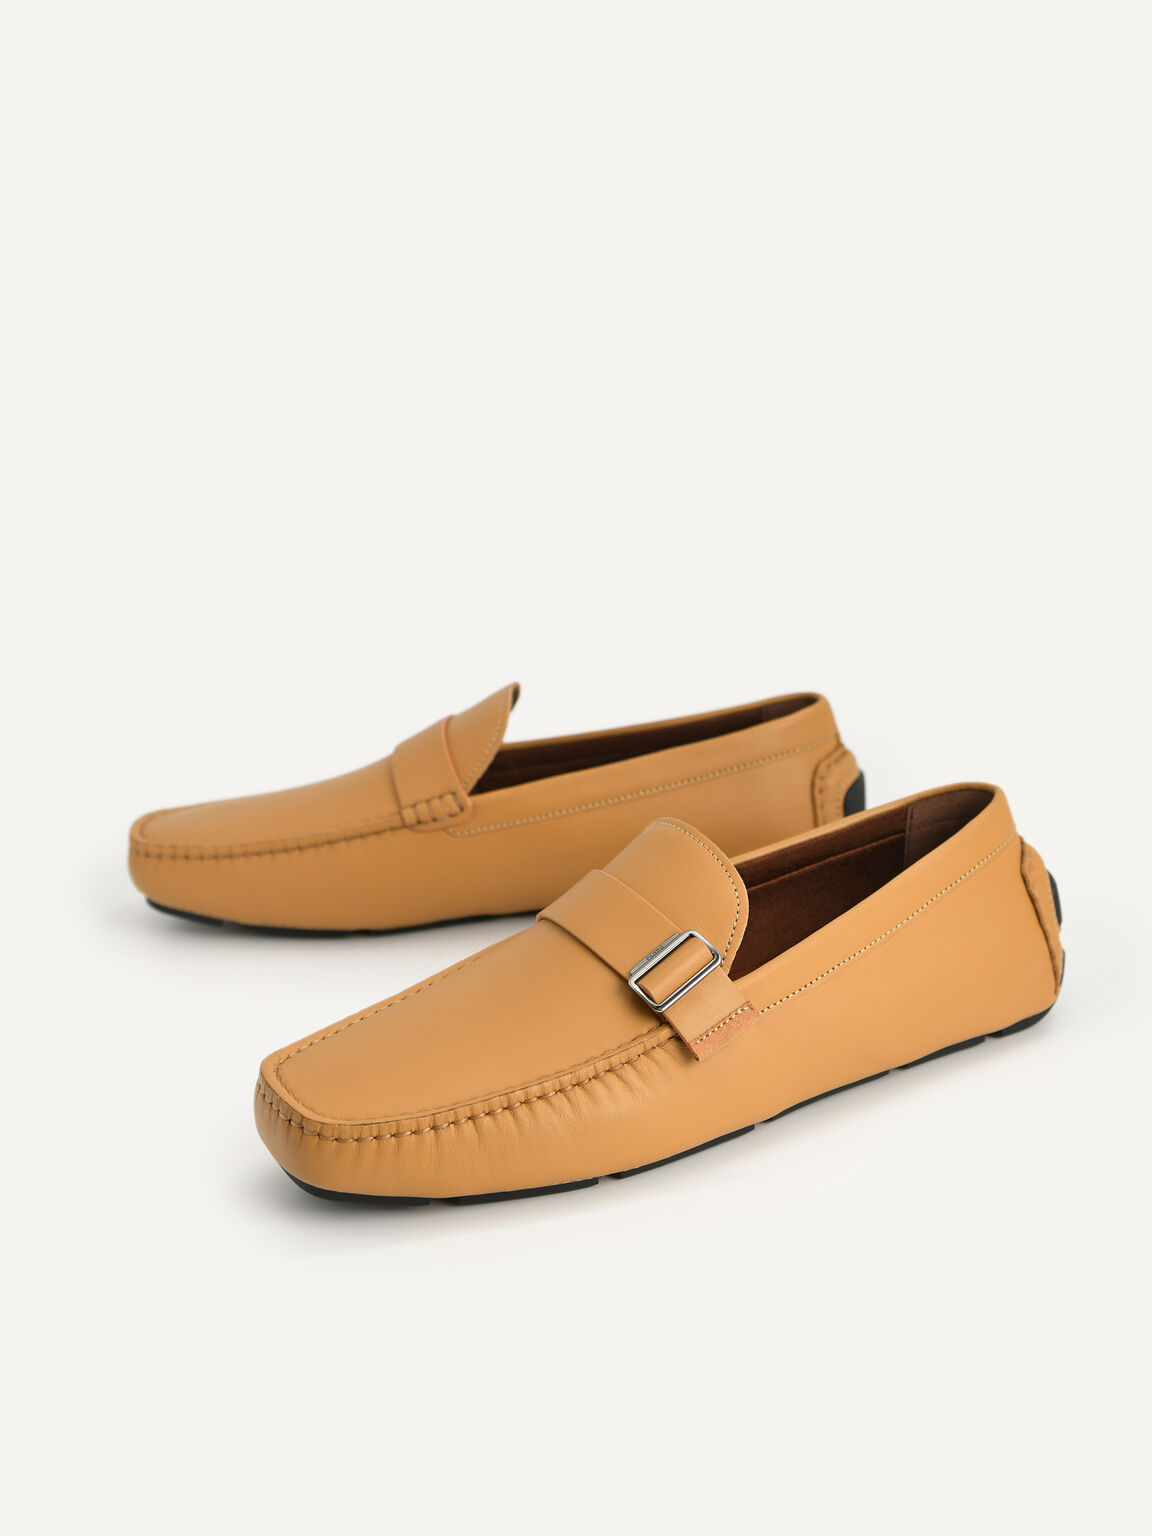 Leather Moccasins with Buckle Detail, Camel, hi-res